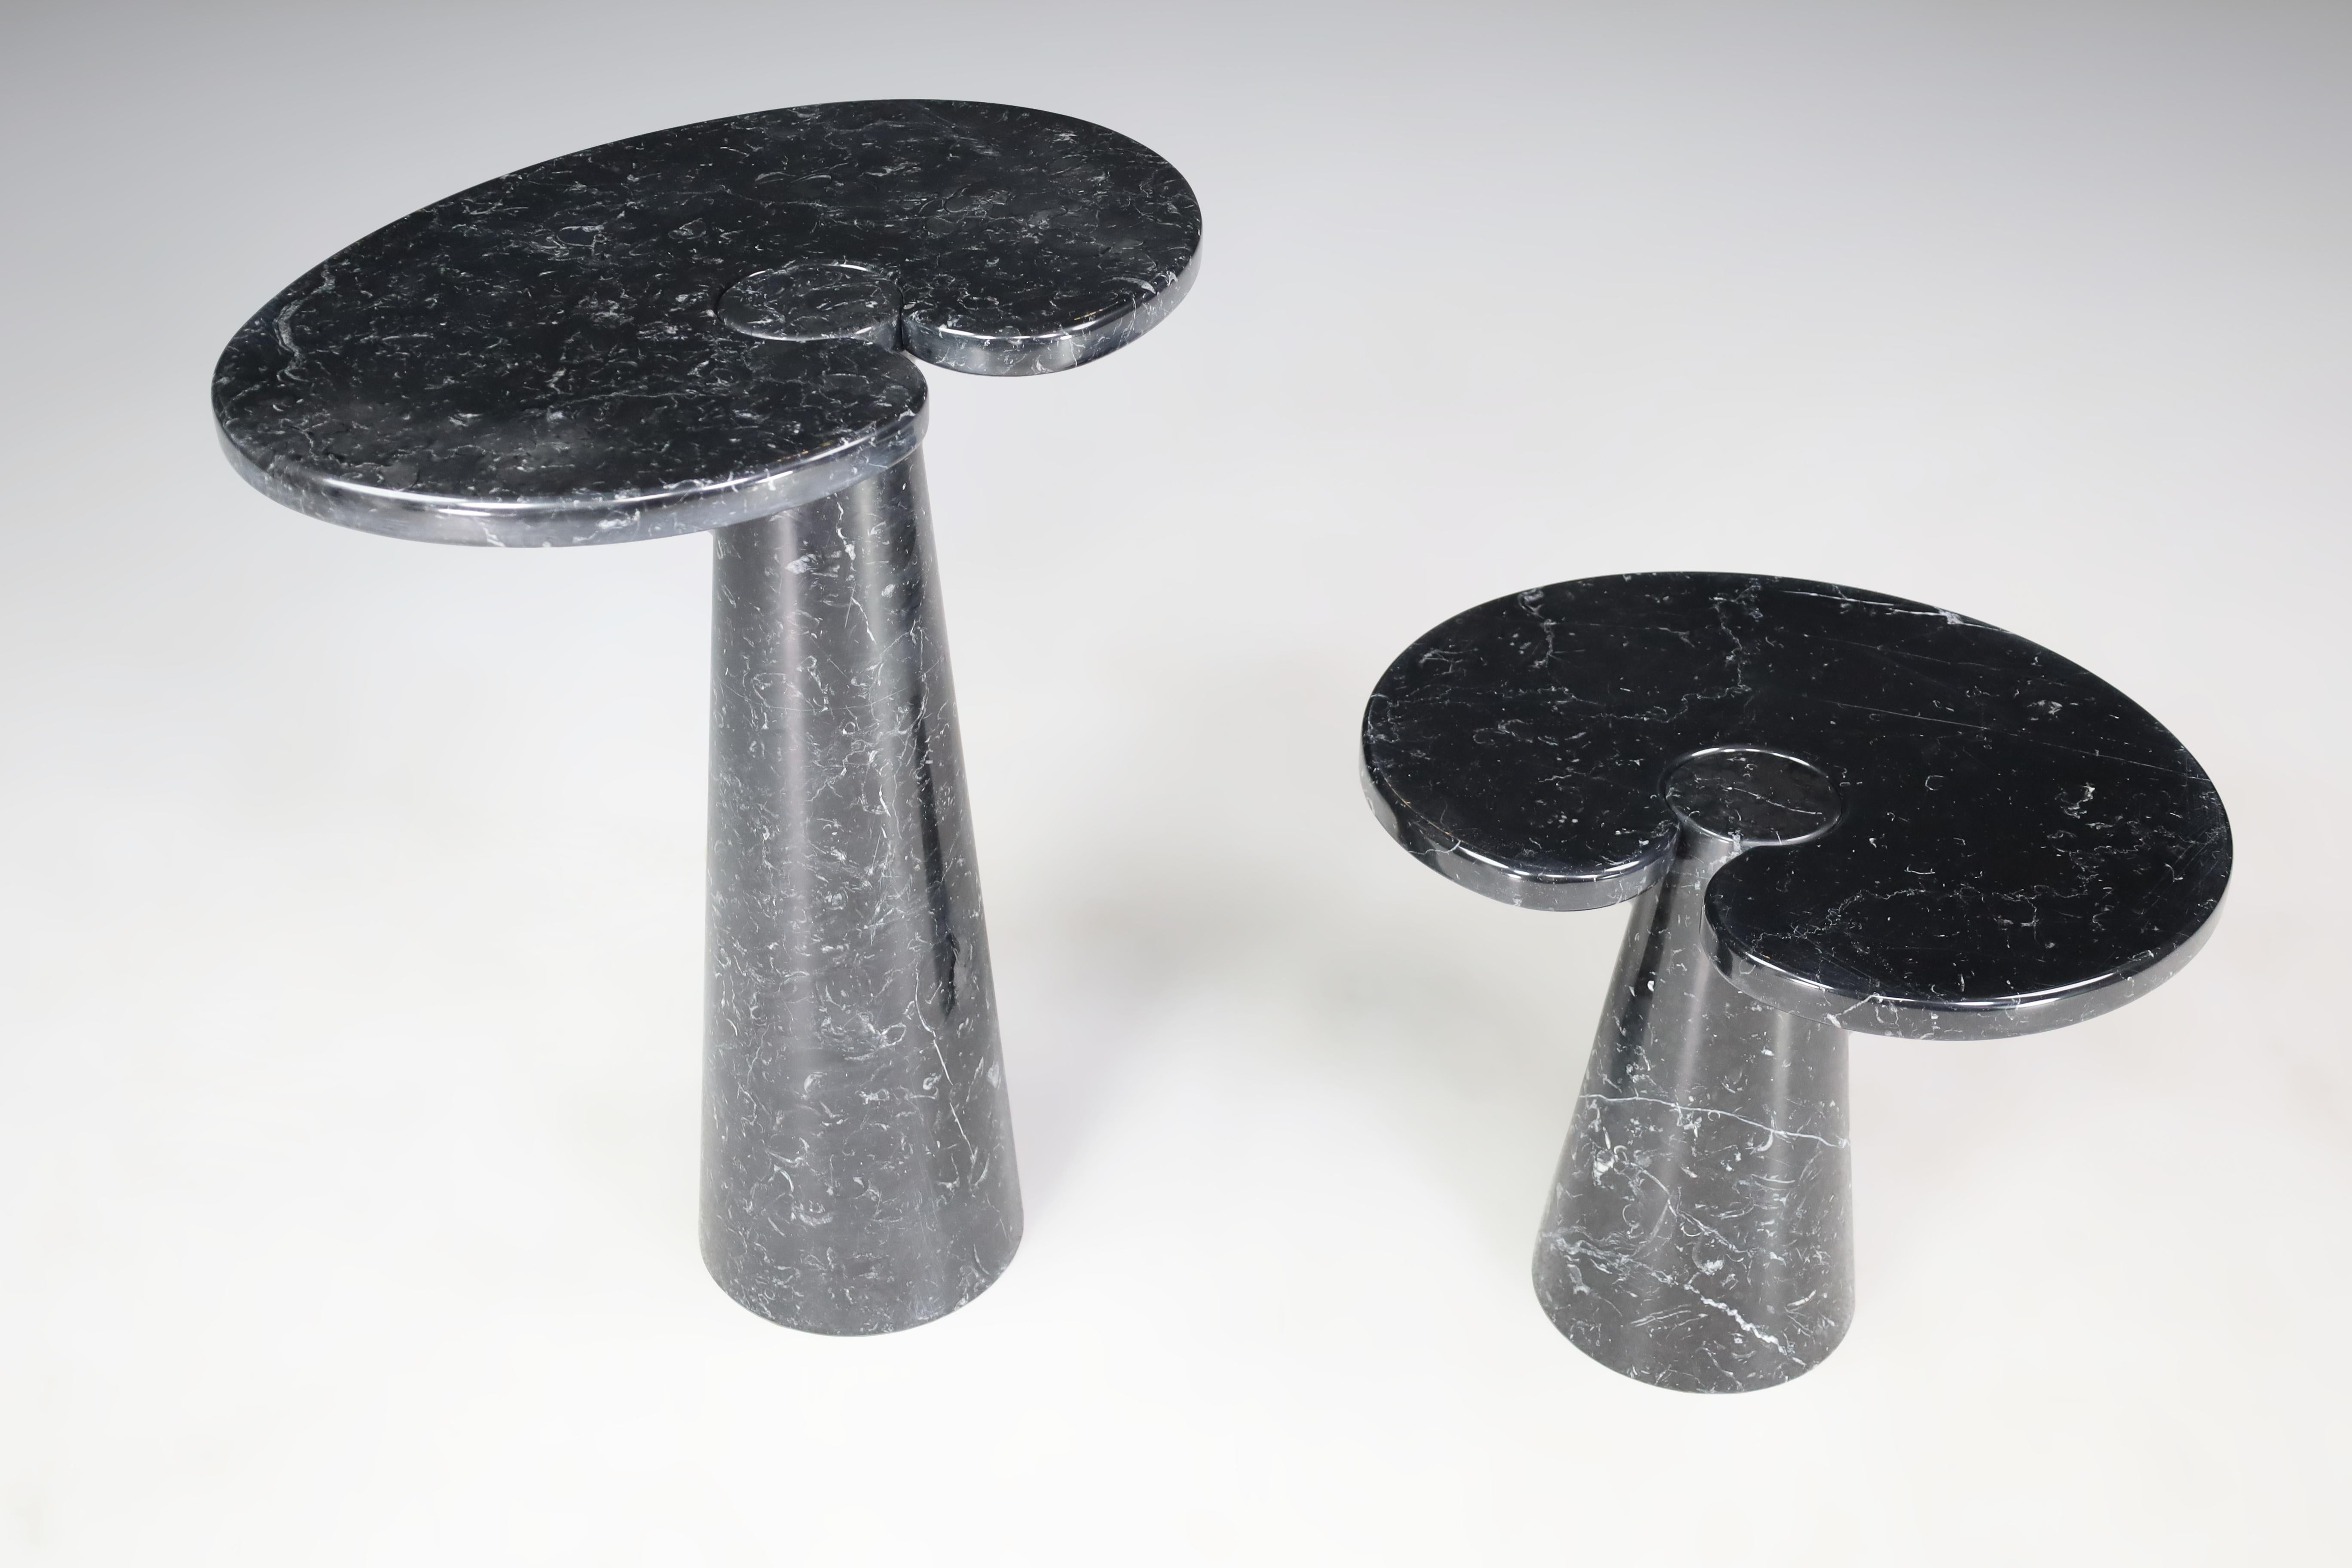 Angelo Mangiarotti set of 2 Nero Marquina marble consoles for Skipper in Italy 1970s

This is a set of two black marble console tables called 